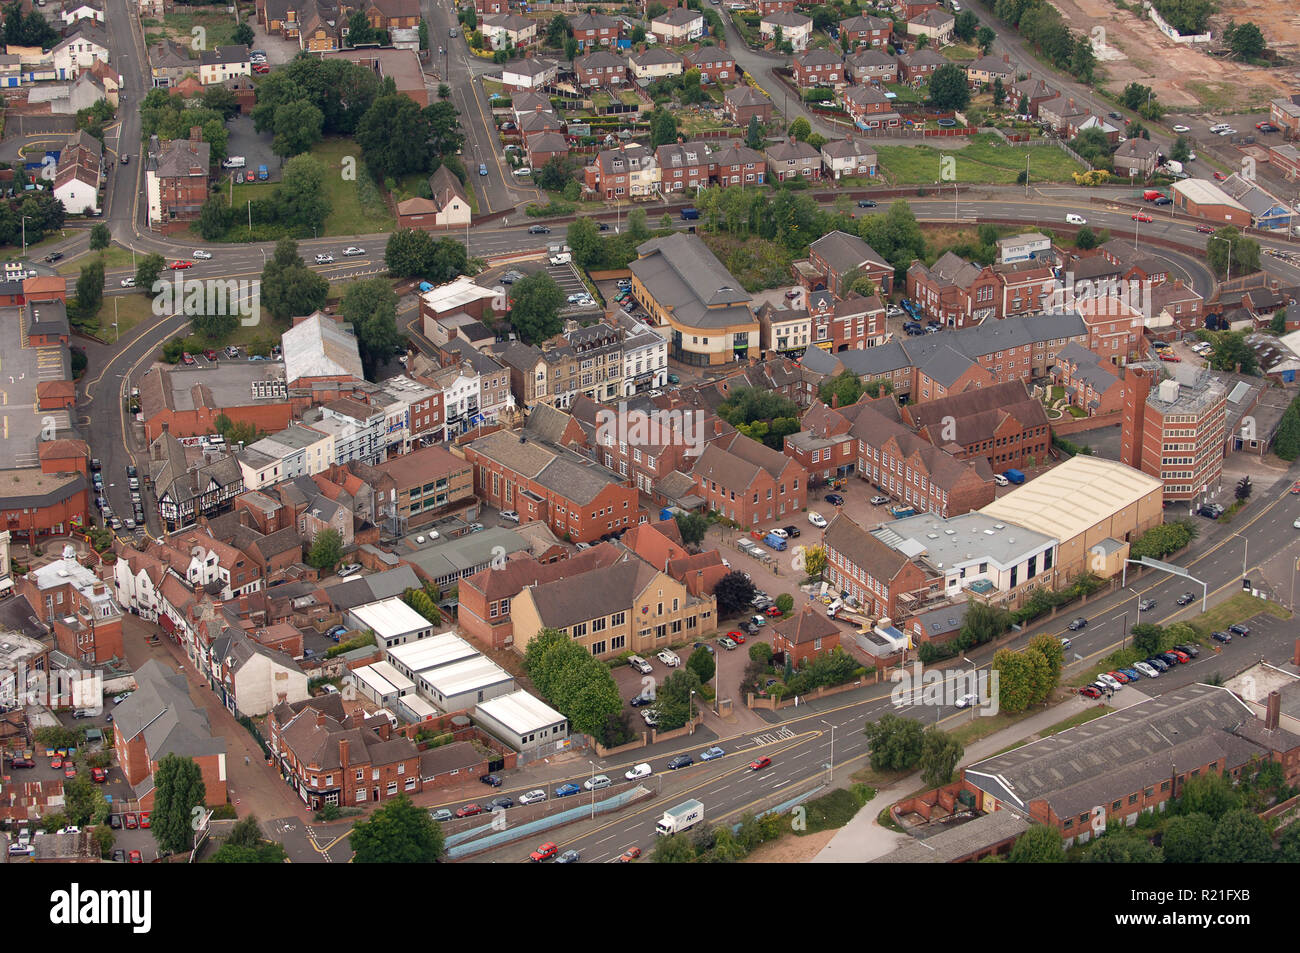 Aerial view of Stourbridge town centre, West Midlands, Uk showing Lower High Street and Kind Edward VI College Stock Photo